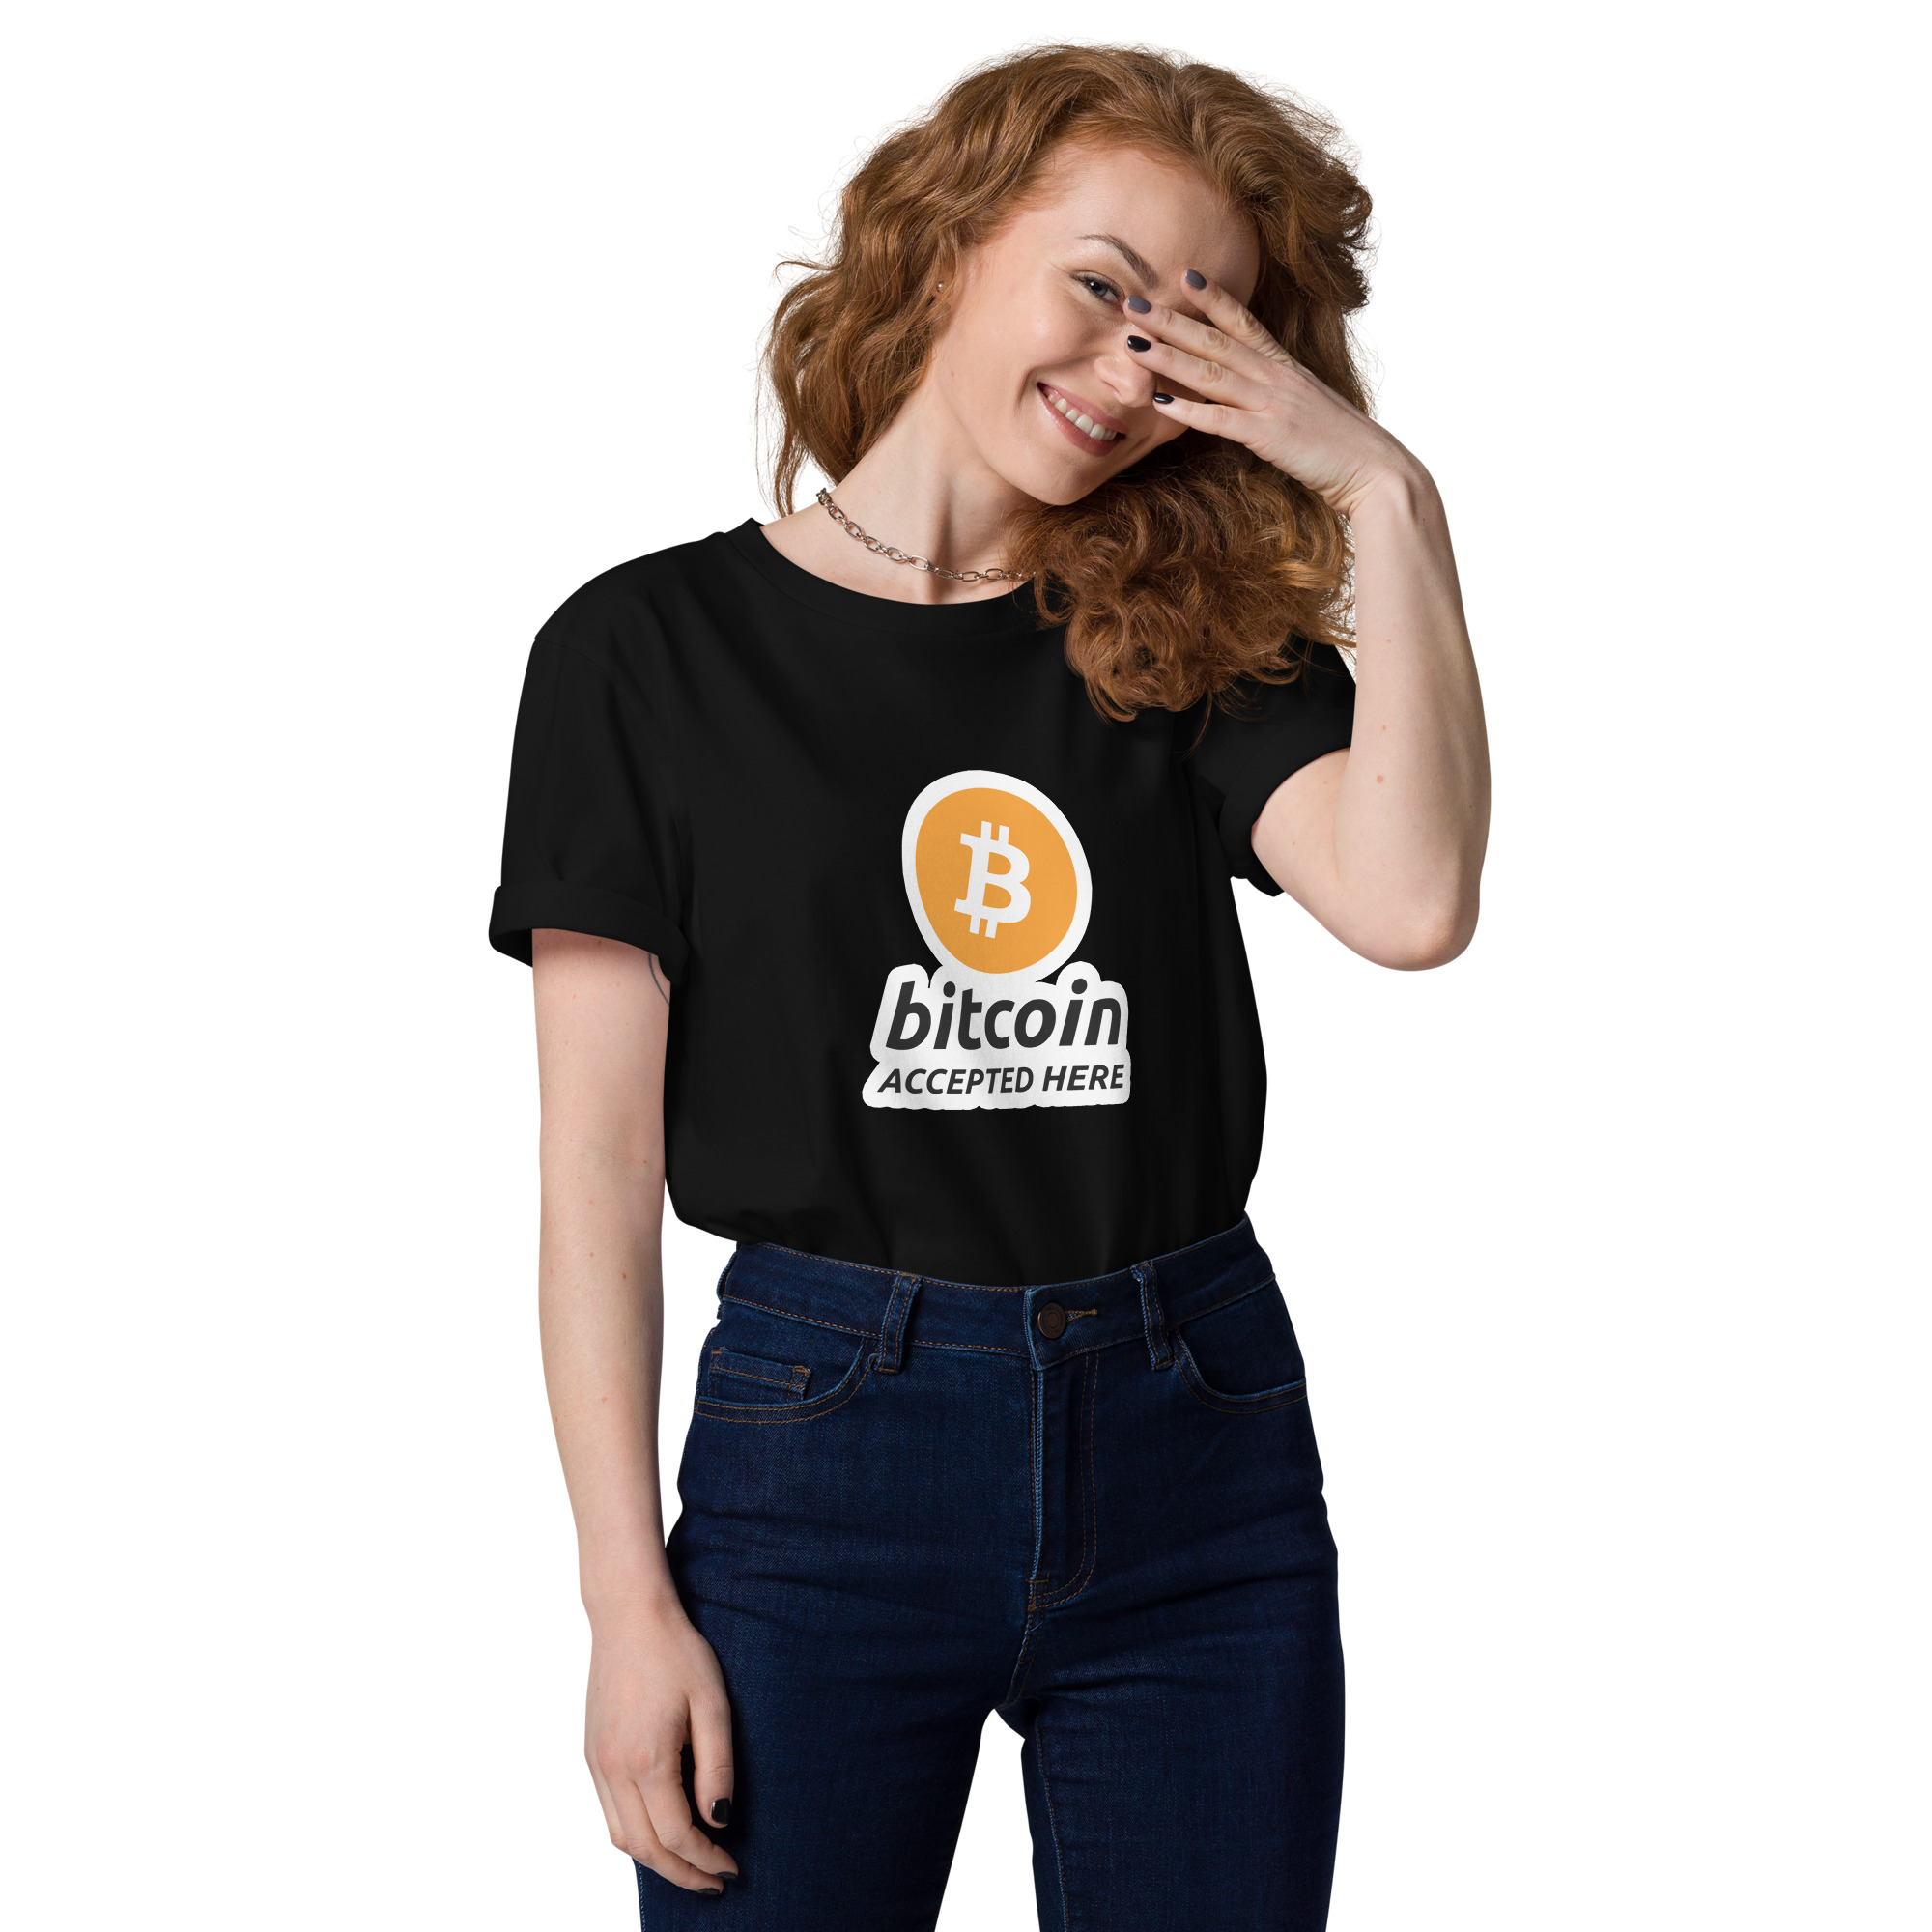 Bitcoin Accepted Here – Unisex organic cotton t-shirt